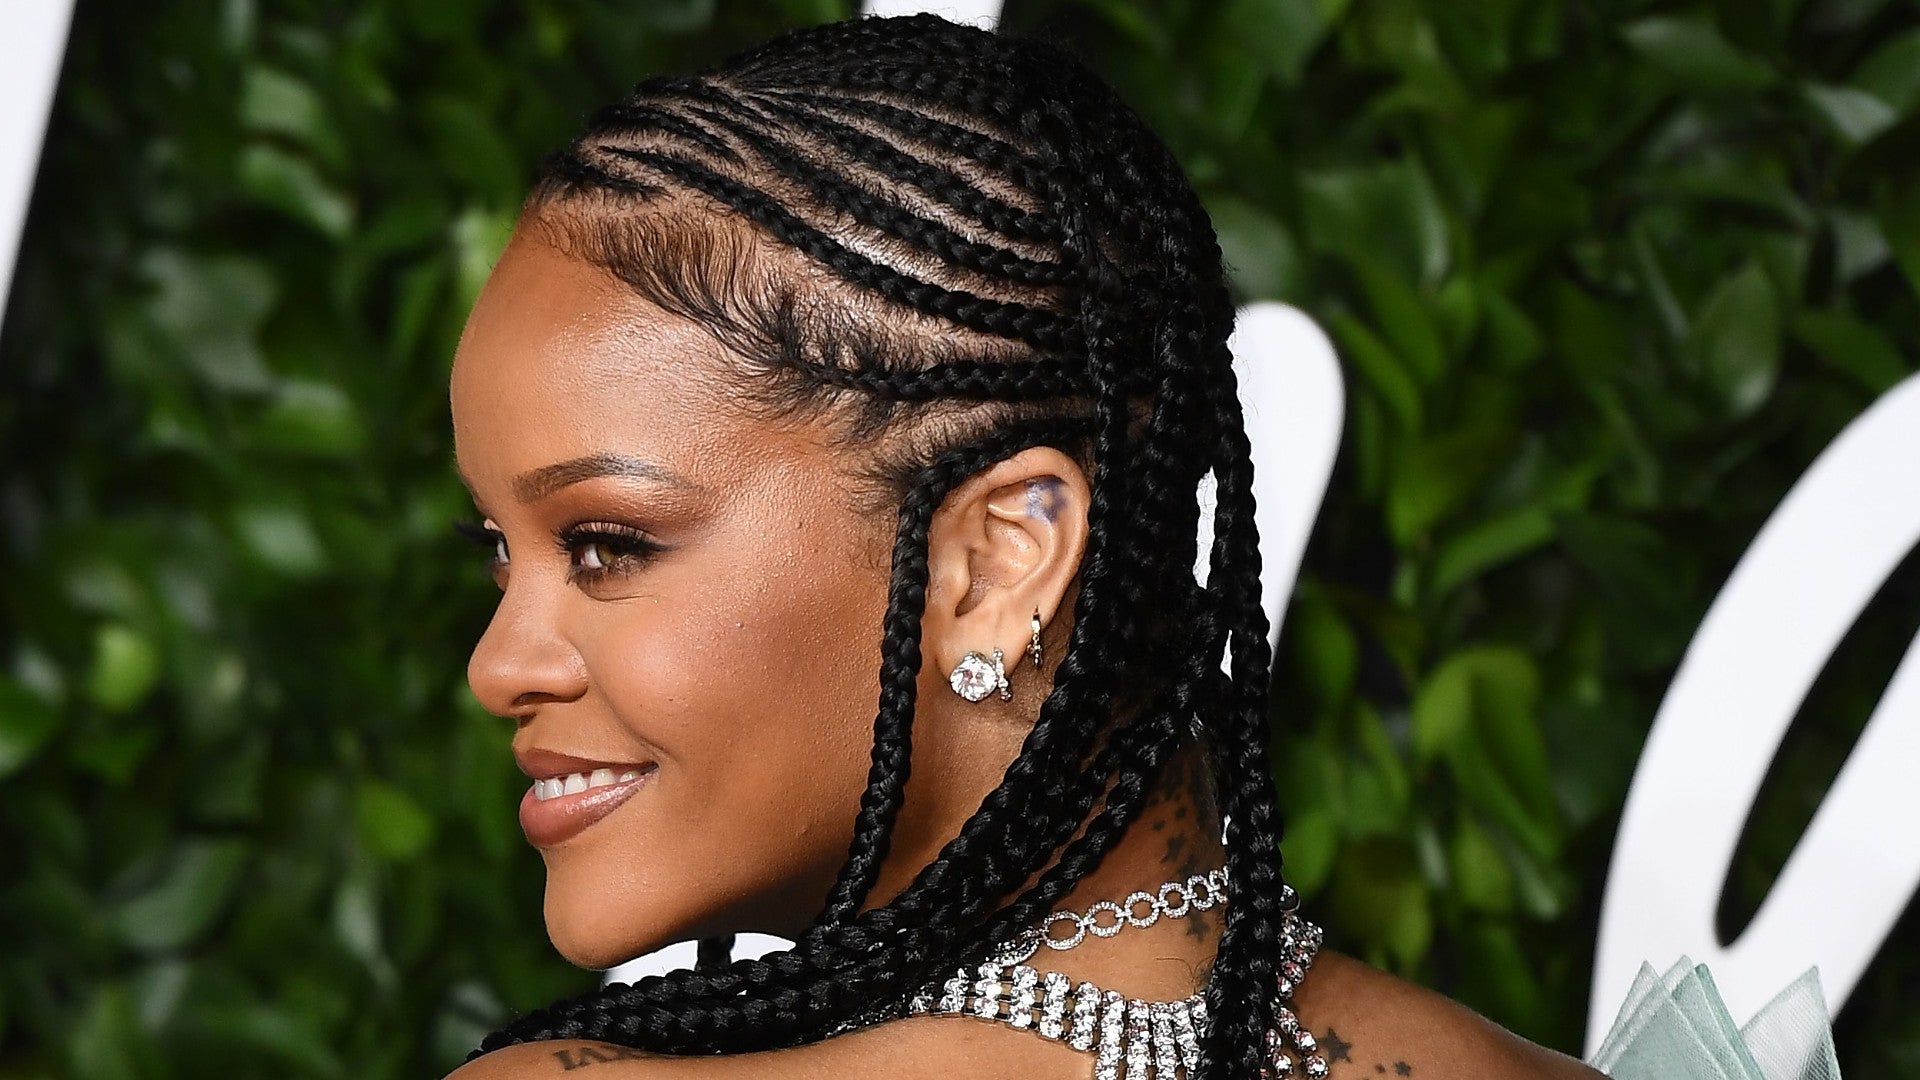 59 Popular Braids Hairstyles For Men To Copy in 2023